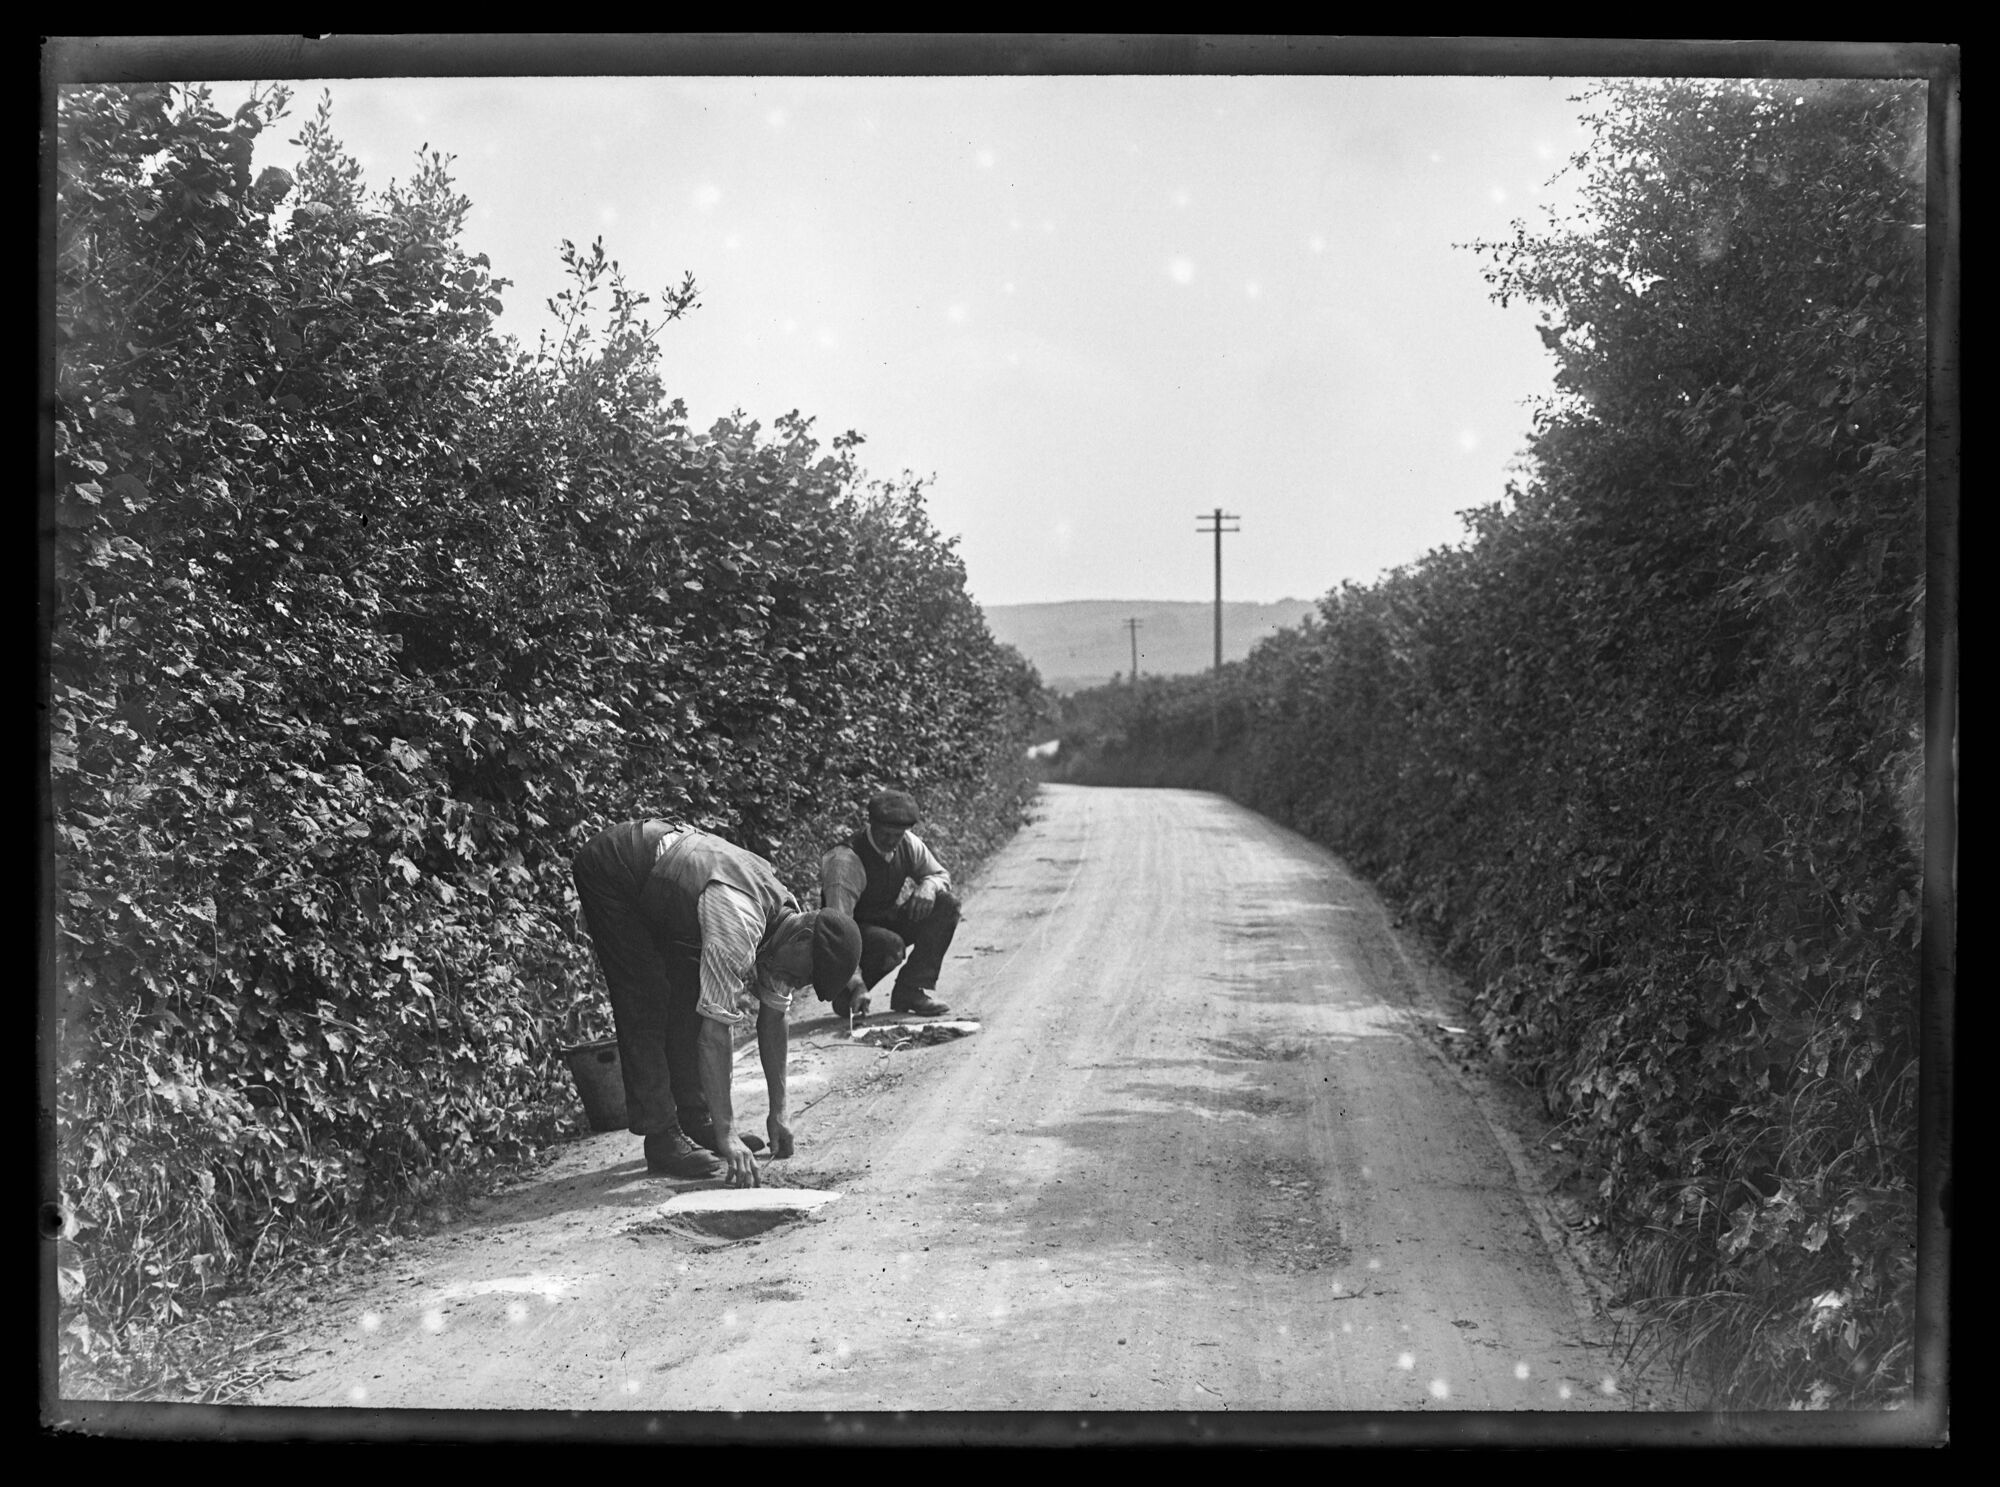 Road Mending, Stainton with Adgarley